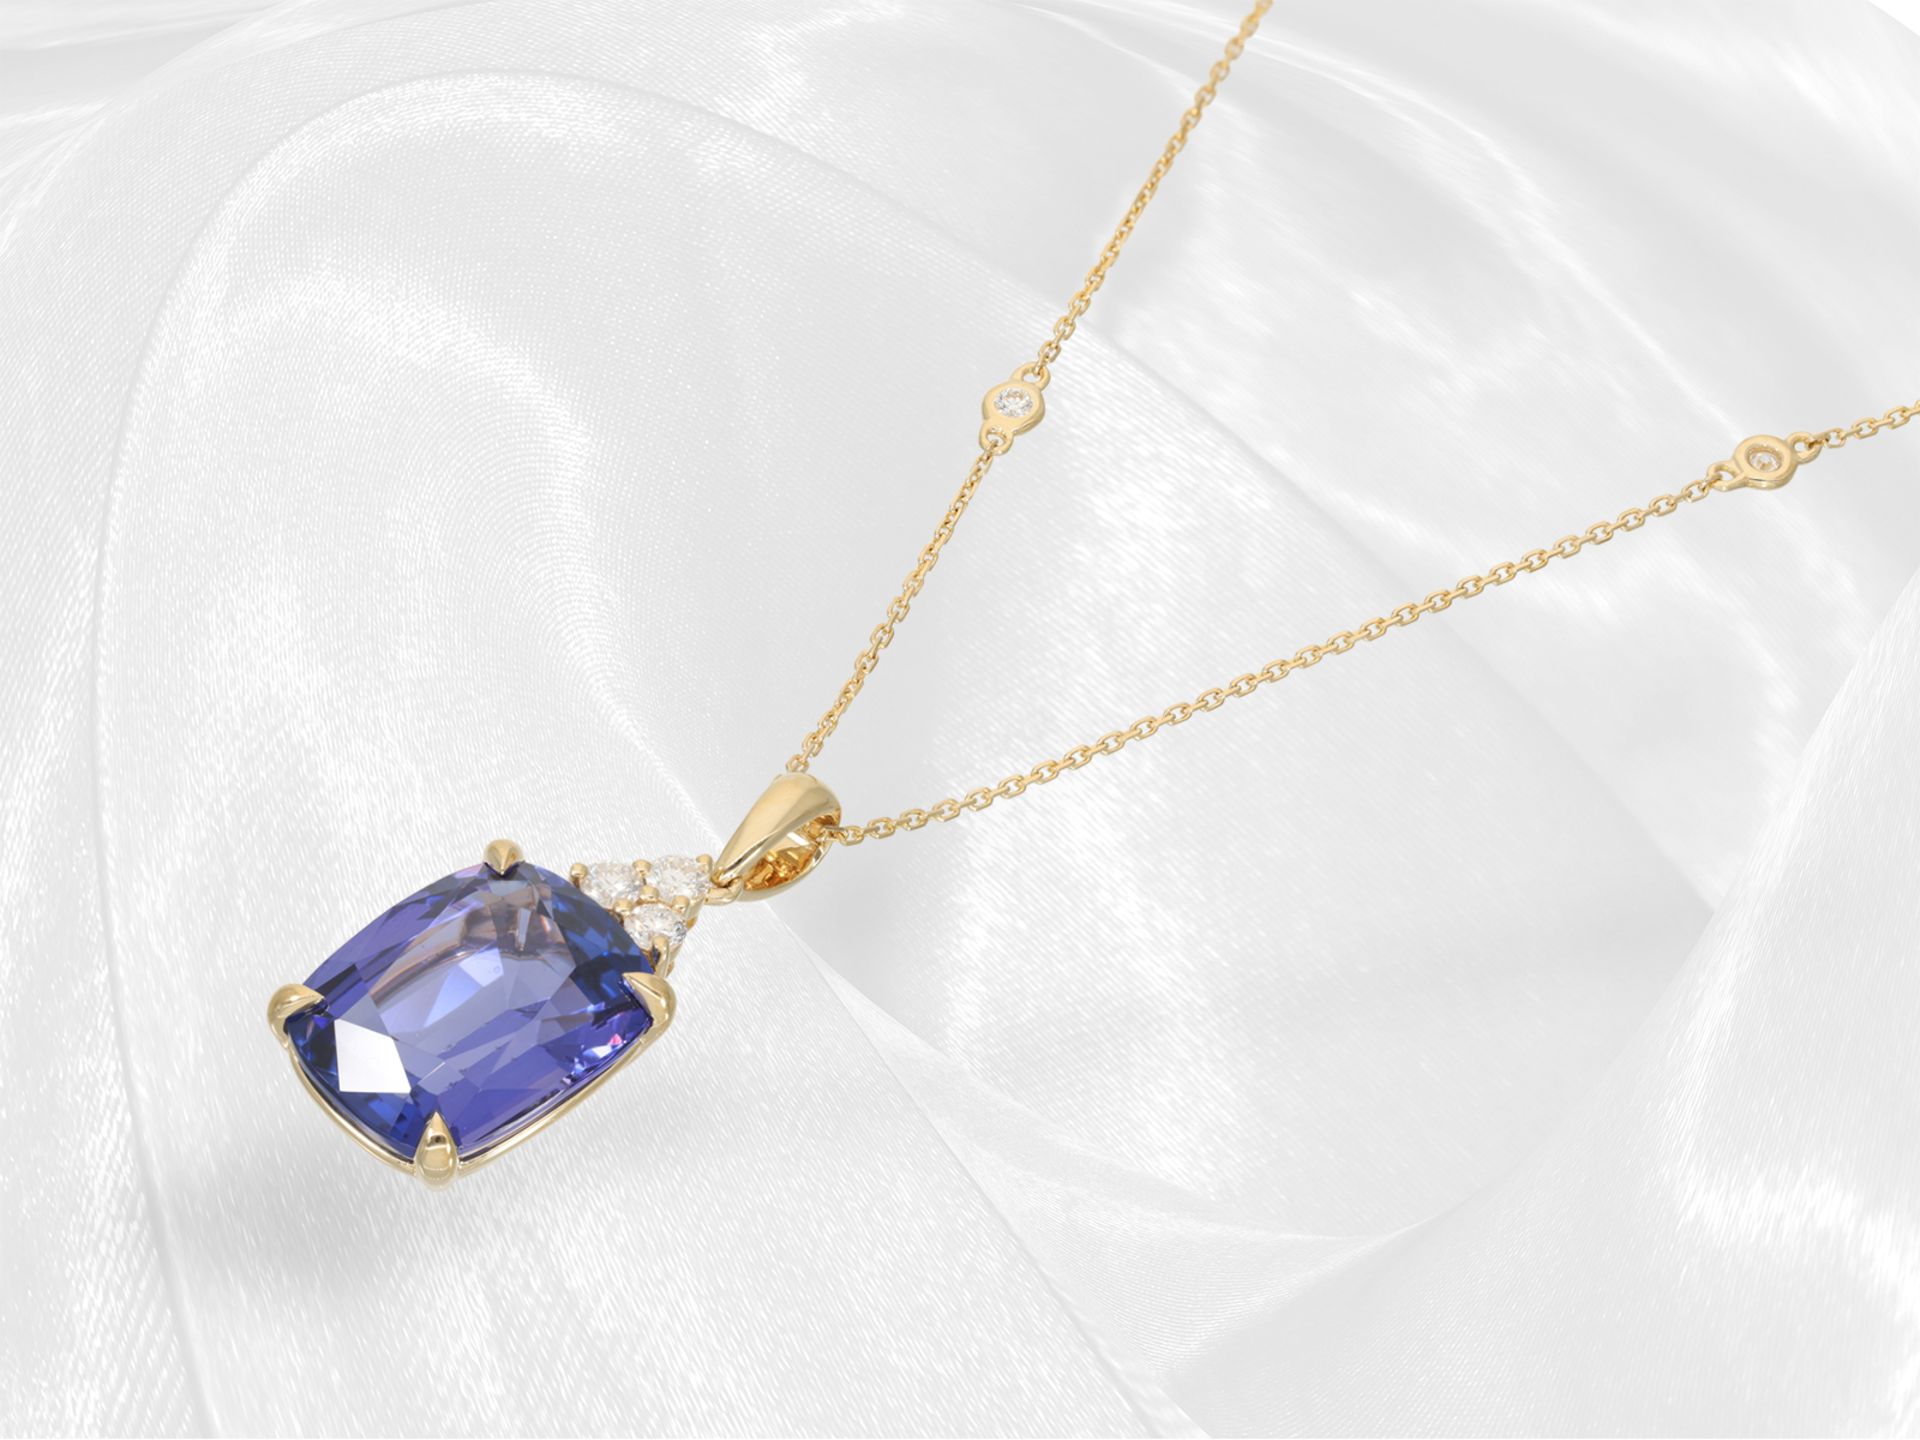 Exclusive, like new tanzanite/brilliant-cut diamond necklace with large tanzanite of 11.15ct in very - Image 10 of 10